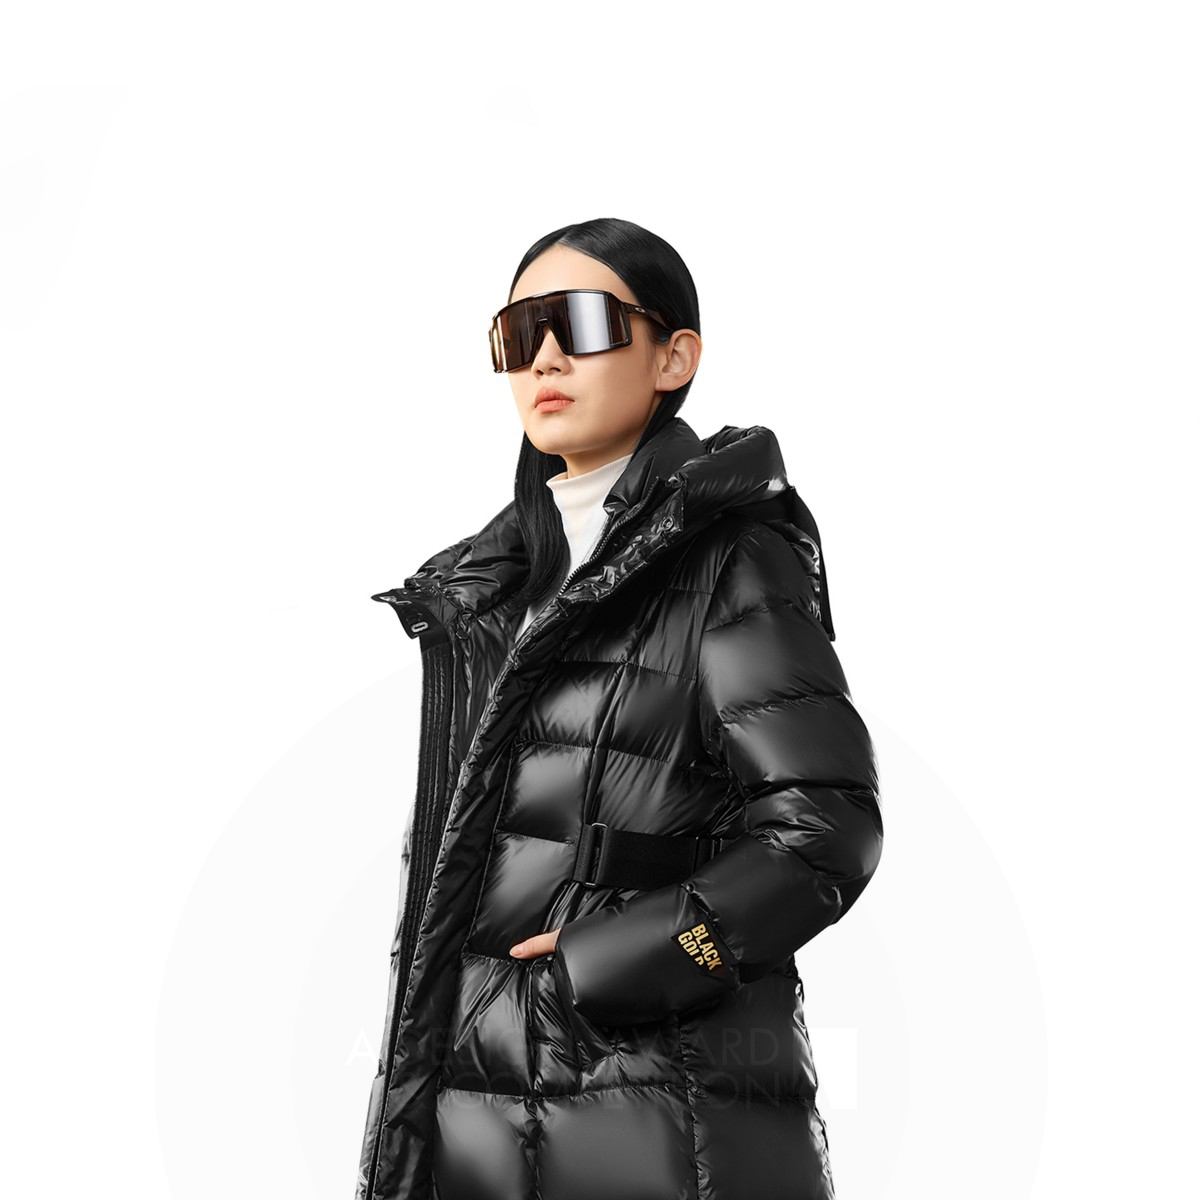 Revolutionary Winter Wear Redefines Fashion and Functionality